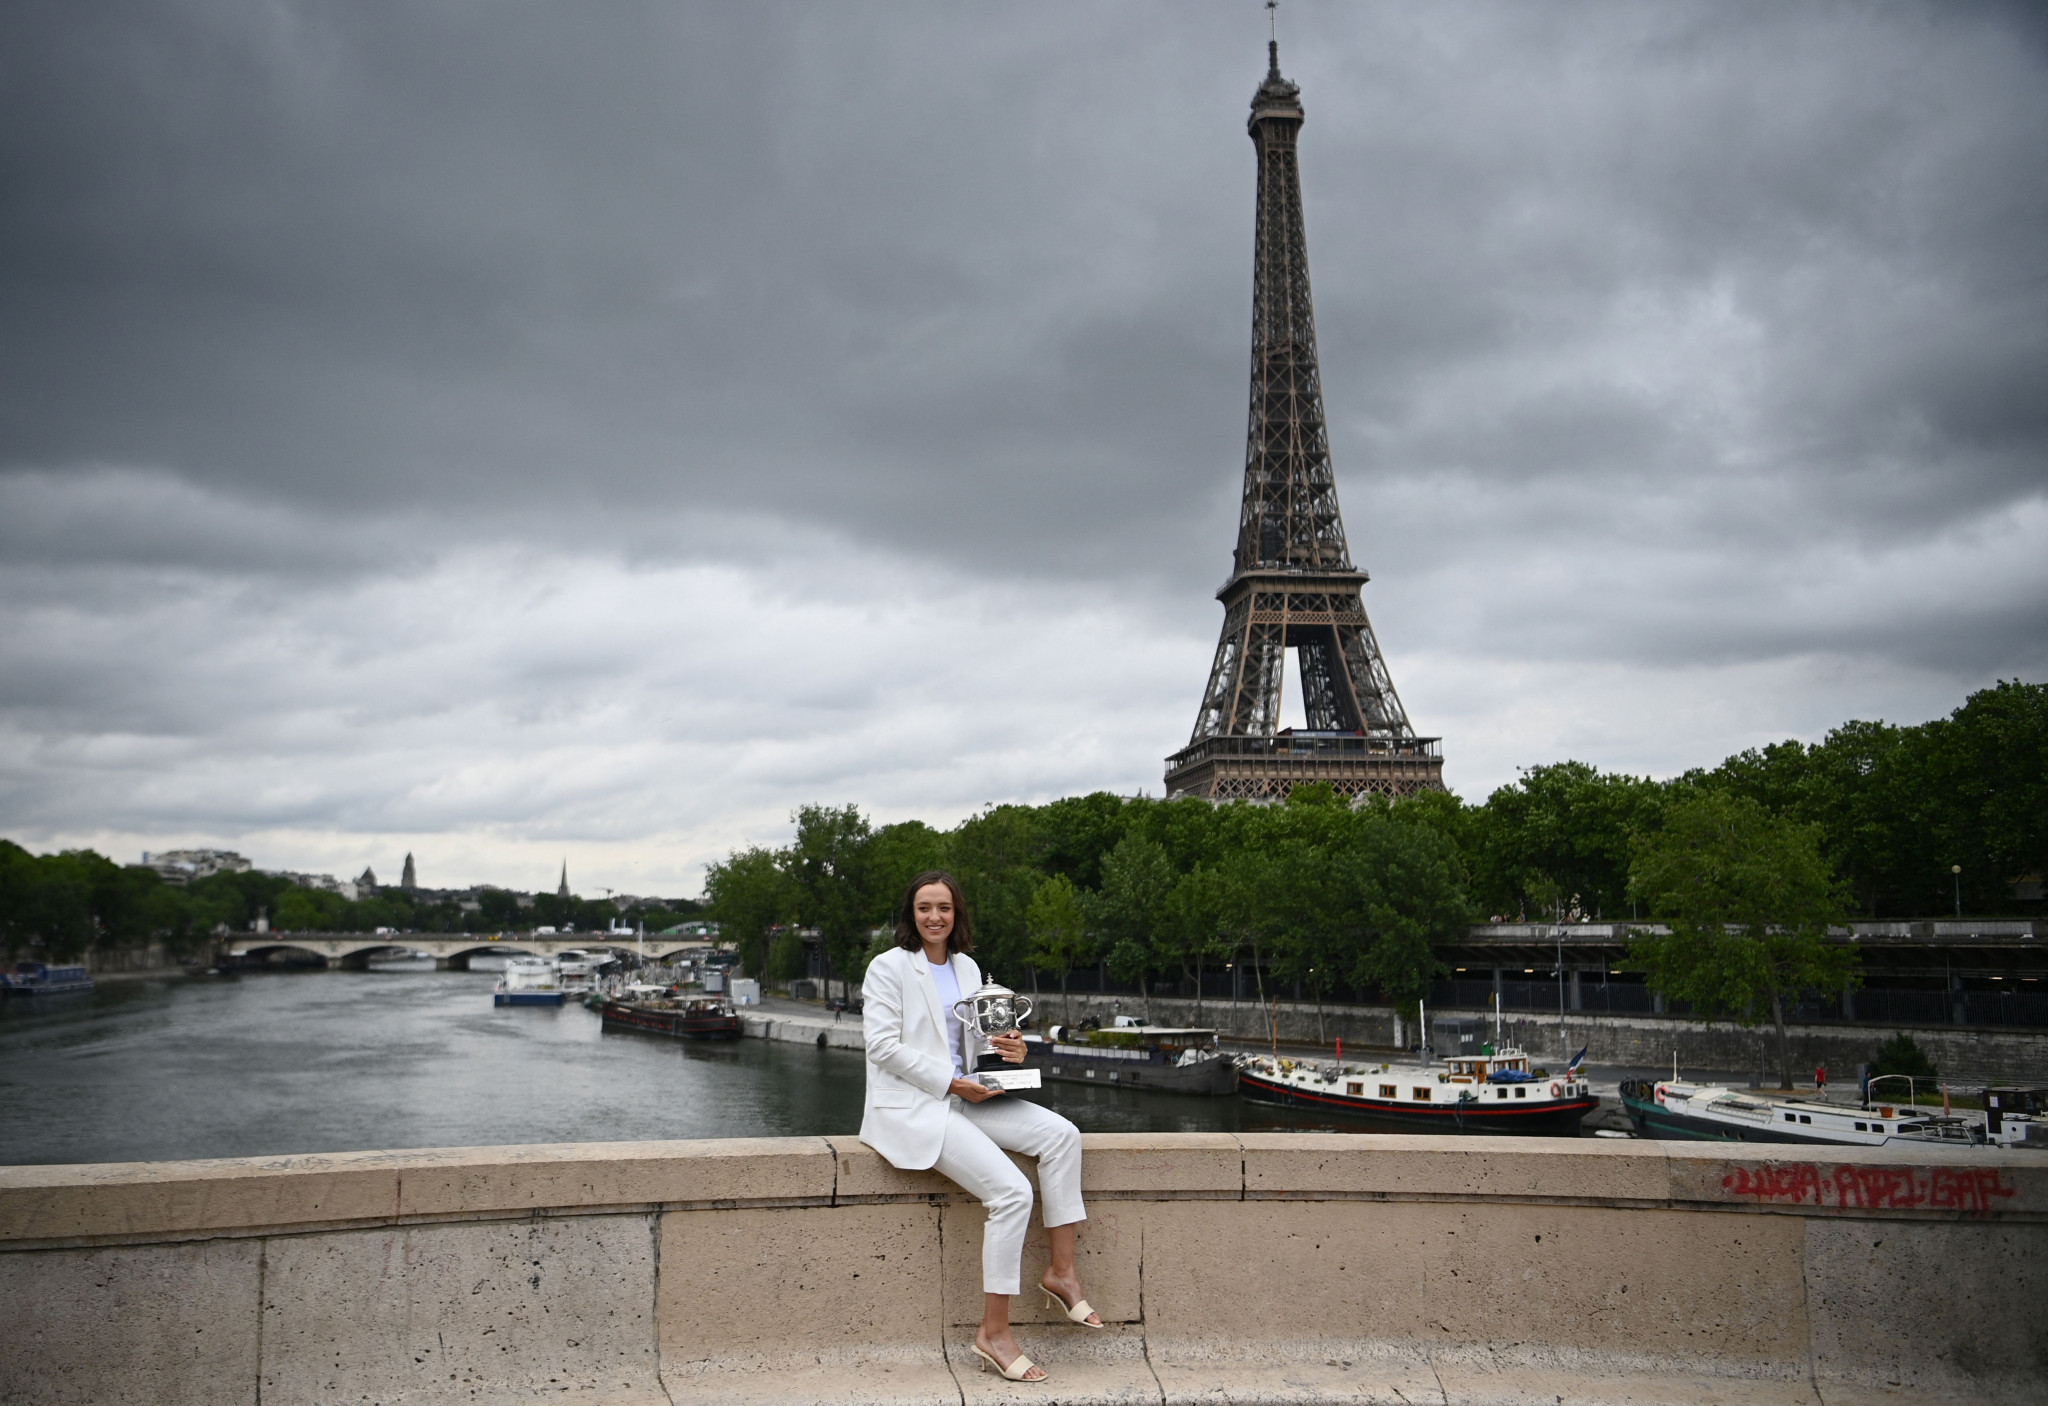 Iga Świątek was posing for photographs in front of the Eiffel Tower ©Getty Images
